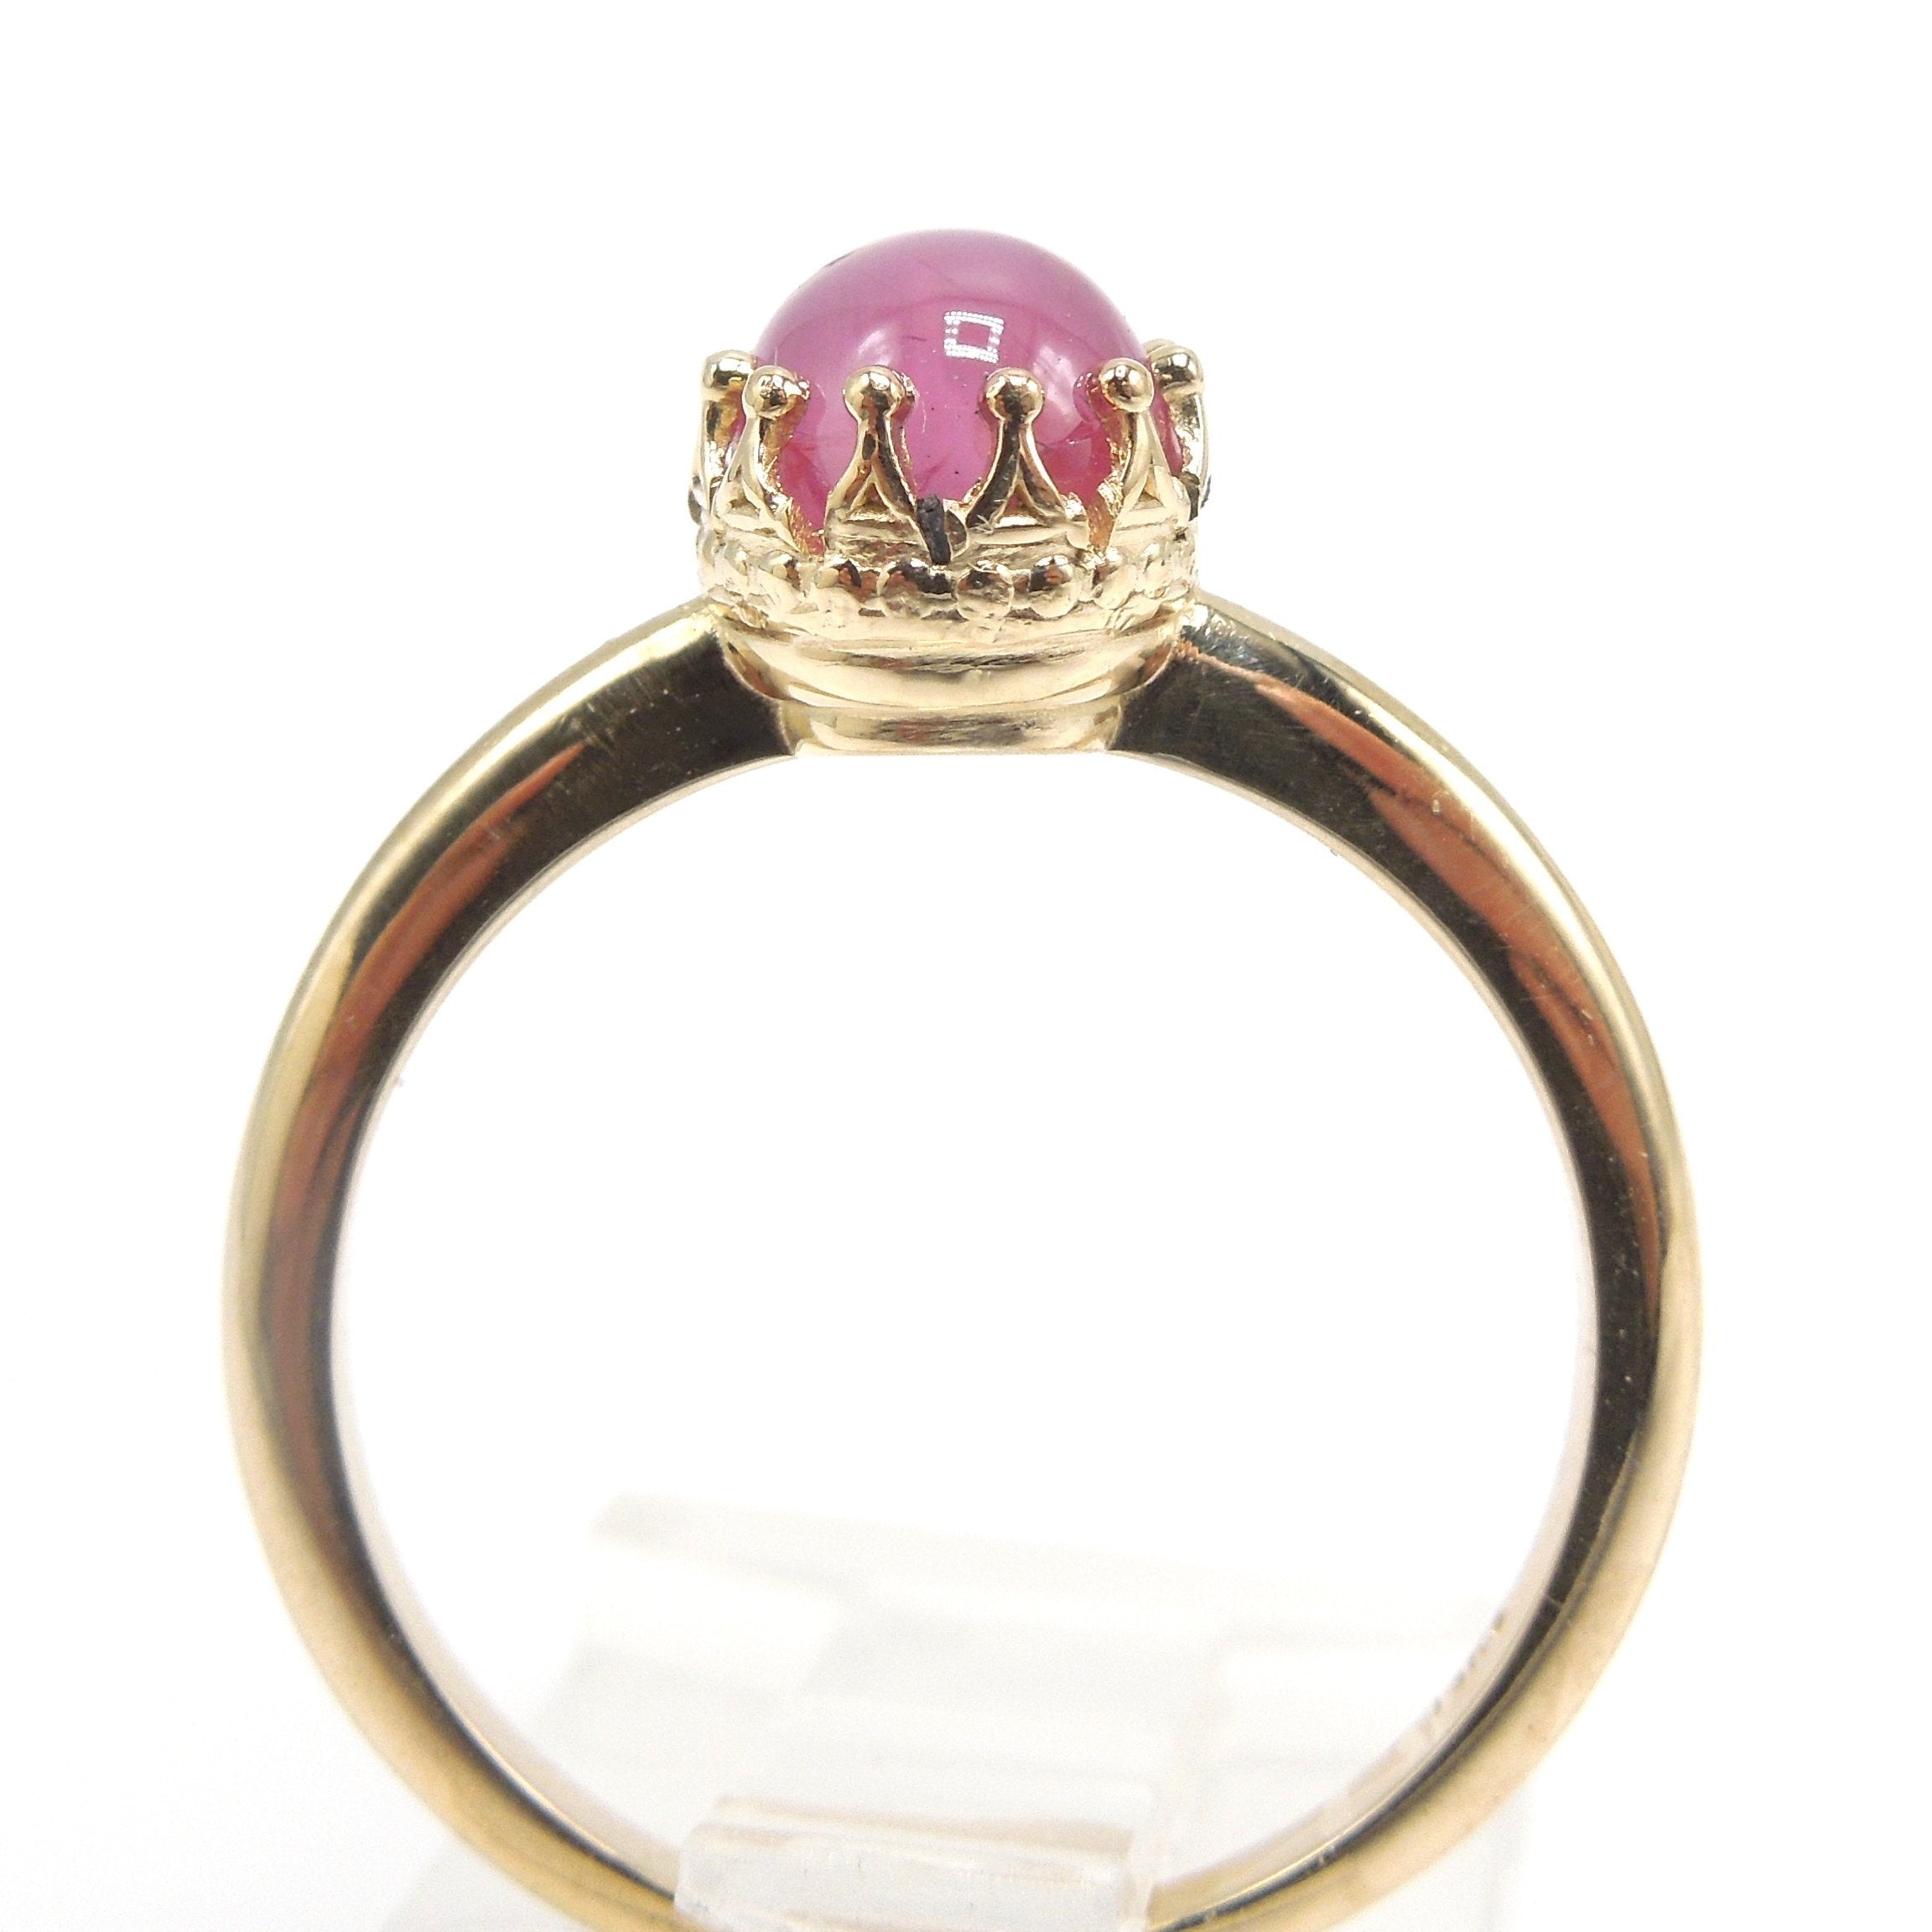 2.46ct Cabochon Pink-Red Star Sapphire in 14K Yellow Gold